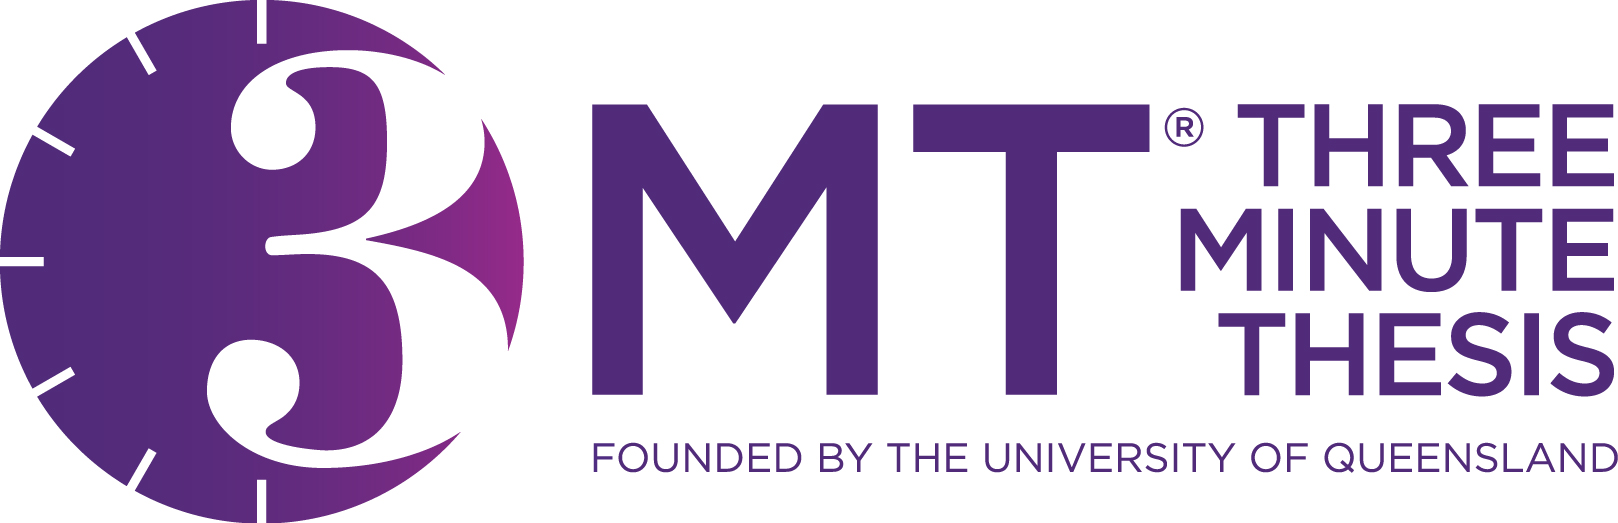 3MT - Three Minute Thesis - Founded by the University of Queensland